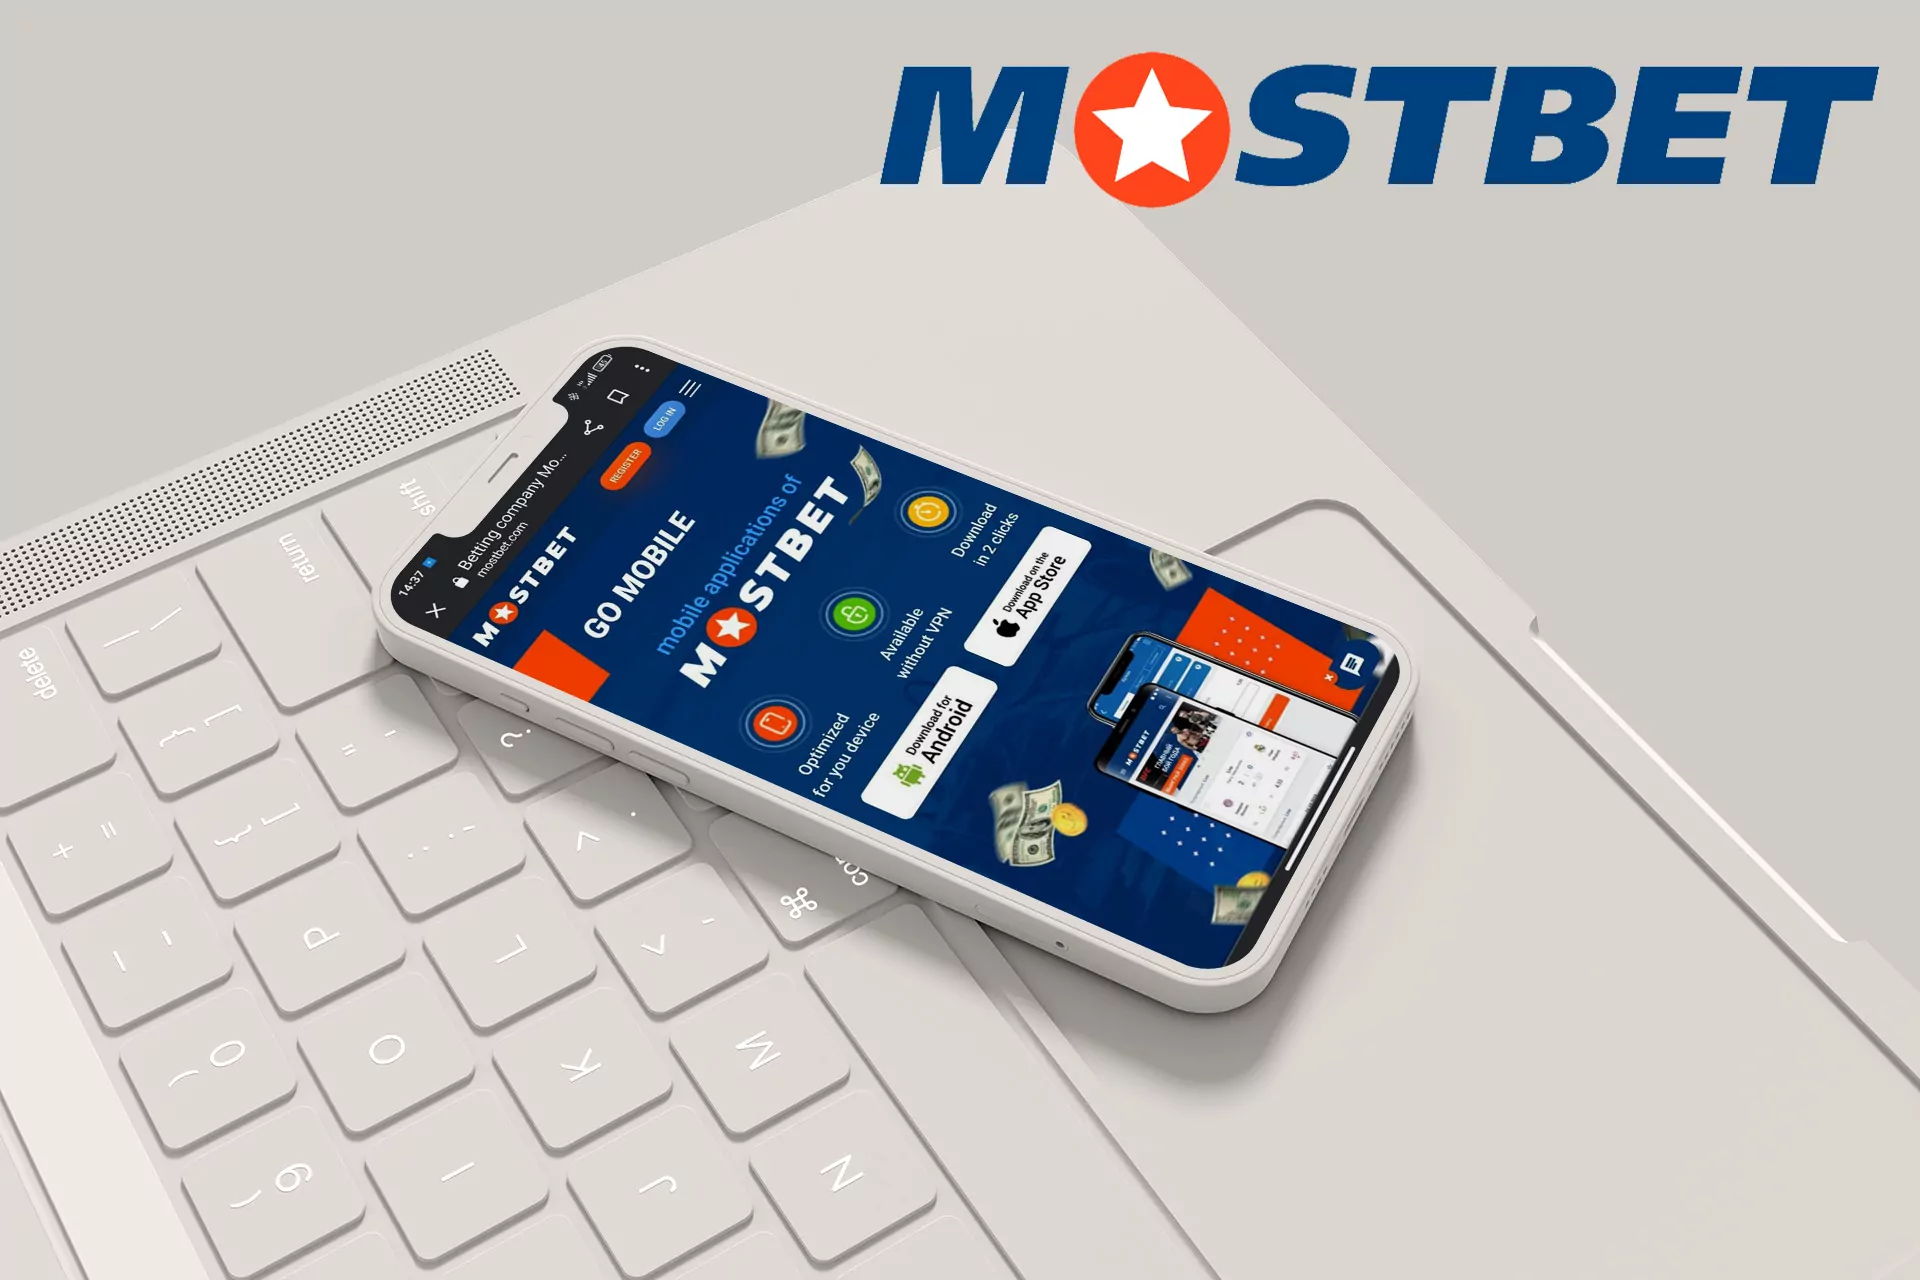 Mostbet App for Android and iOS: Keep It Simple